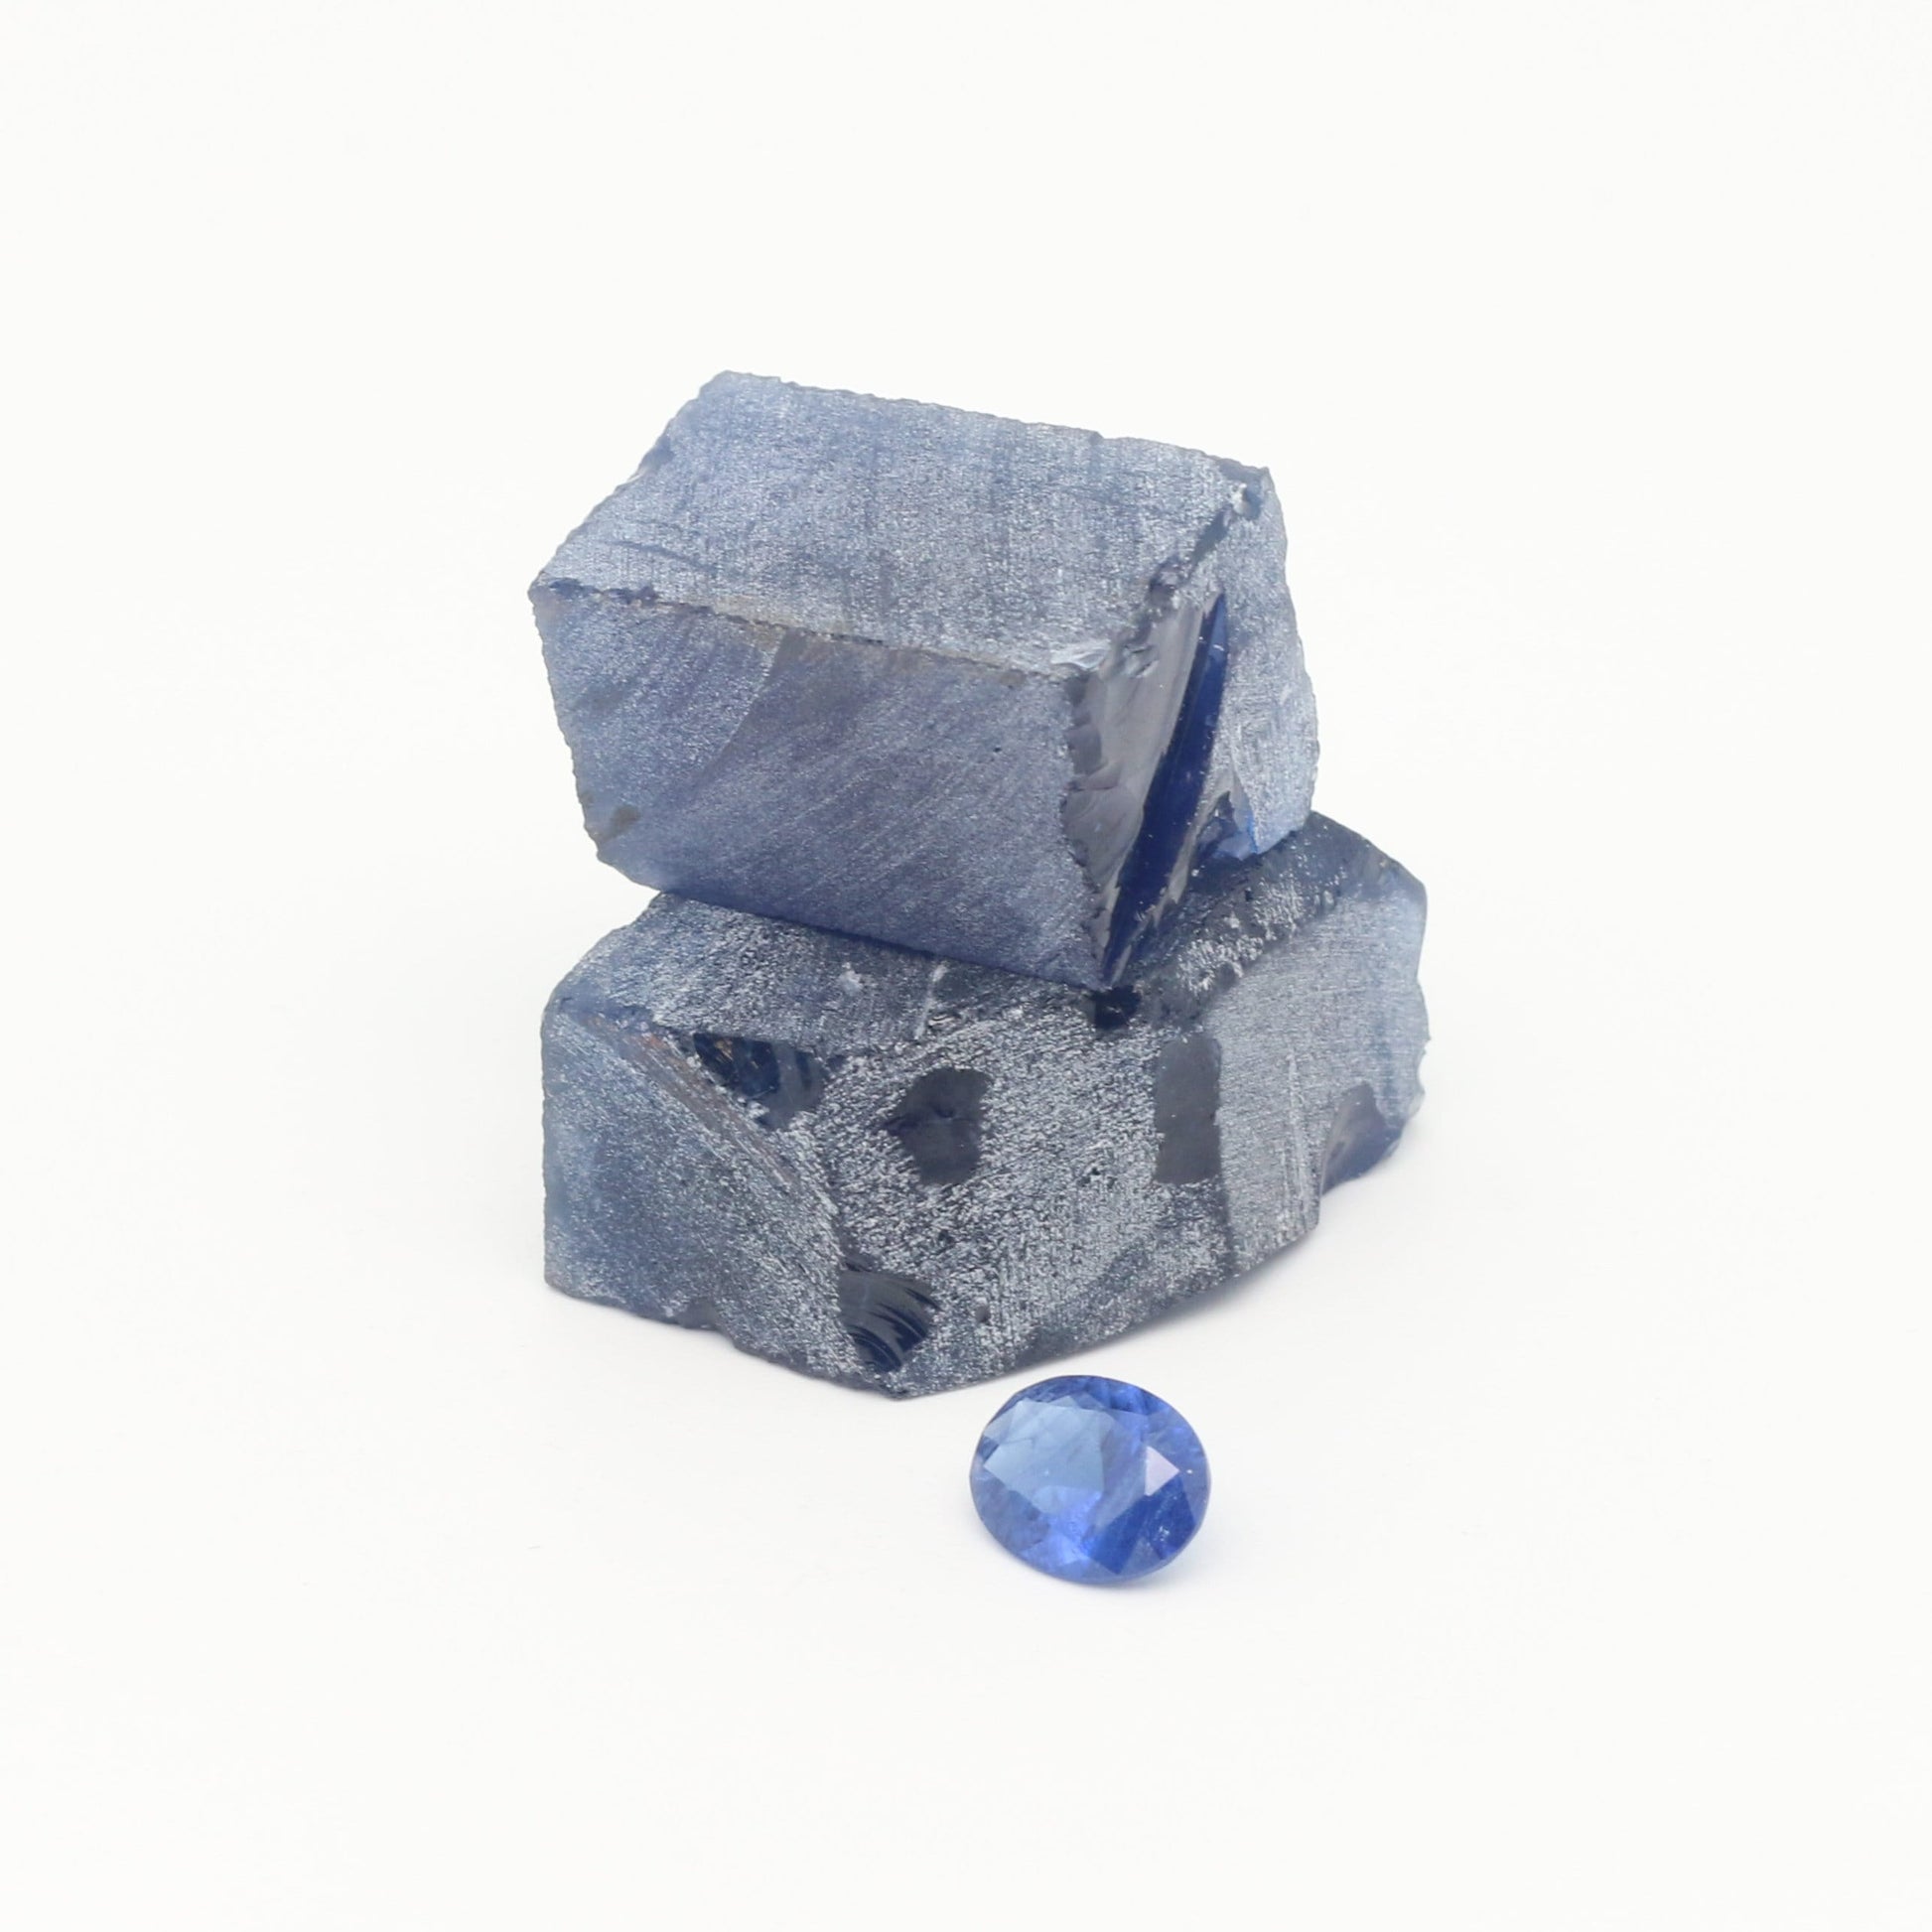 Medium Blue Sapphire (Included) Nanosital Synthetic Lab Created Faceting Rough for Gem Cutting - #Z-597 - Various Sizes